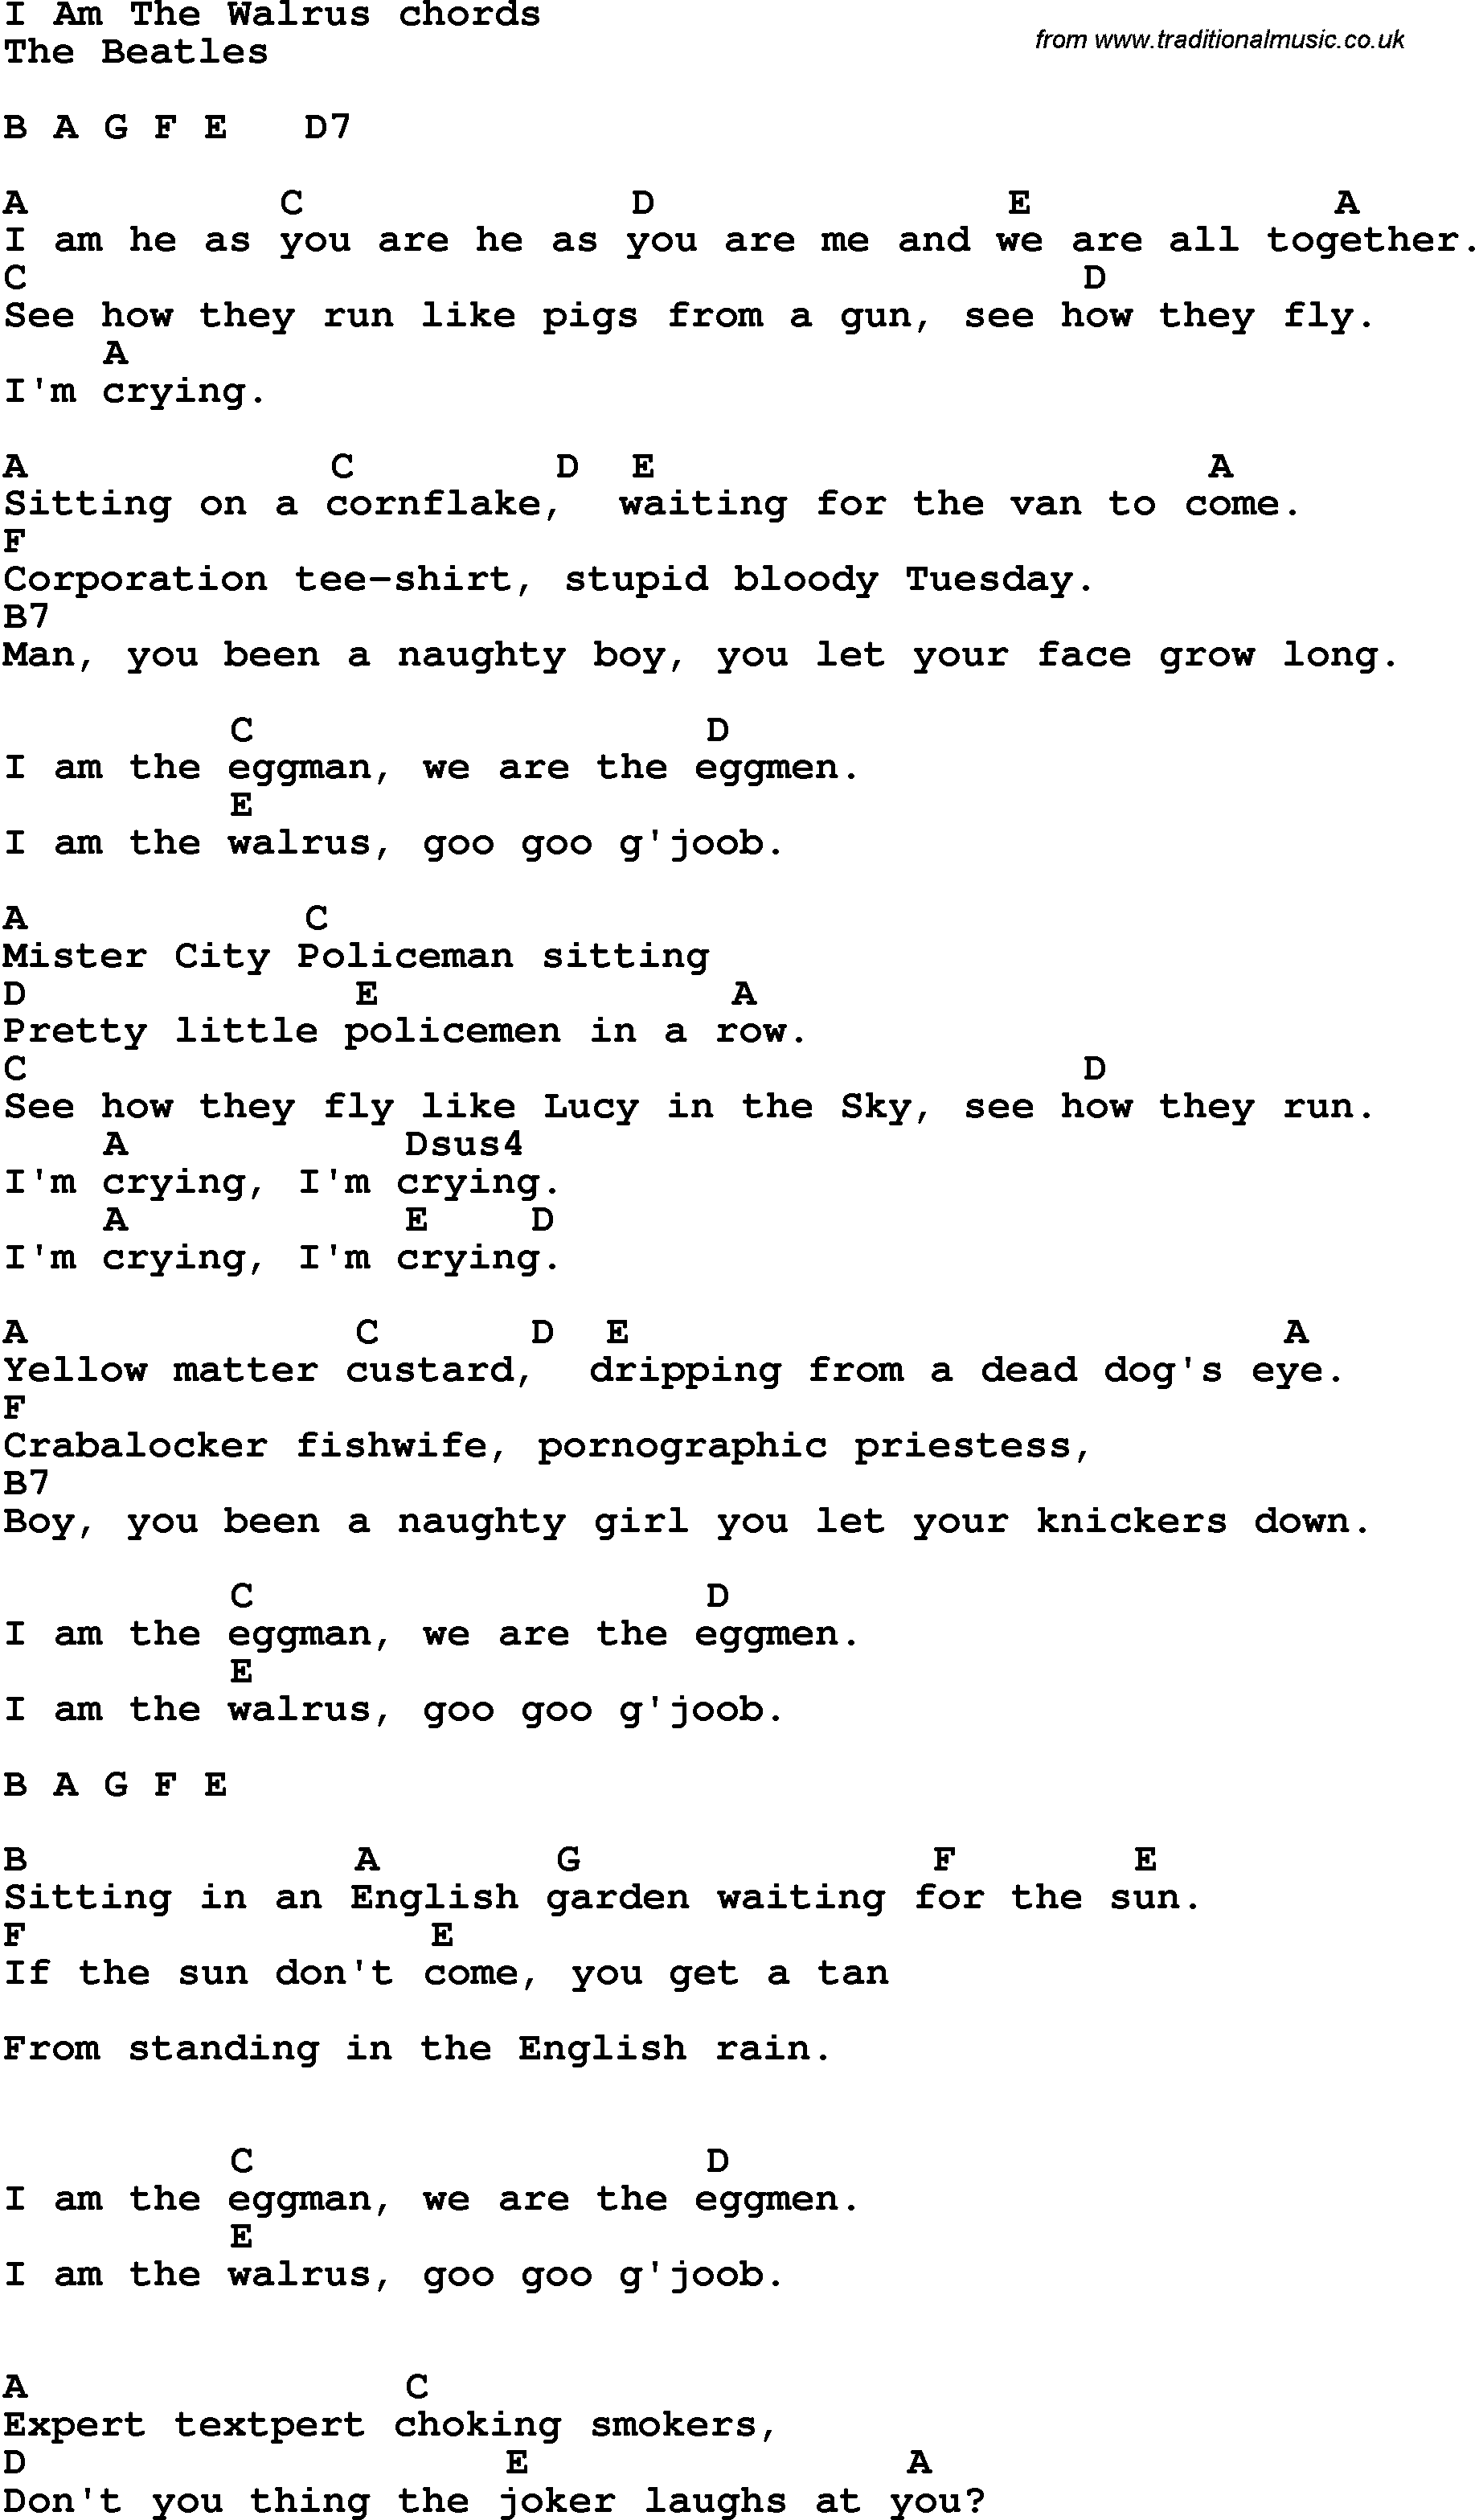 Song Lyrics with guitar chords for I Am The Walrus